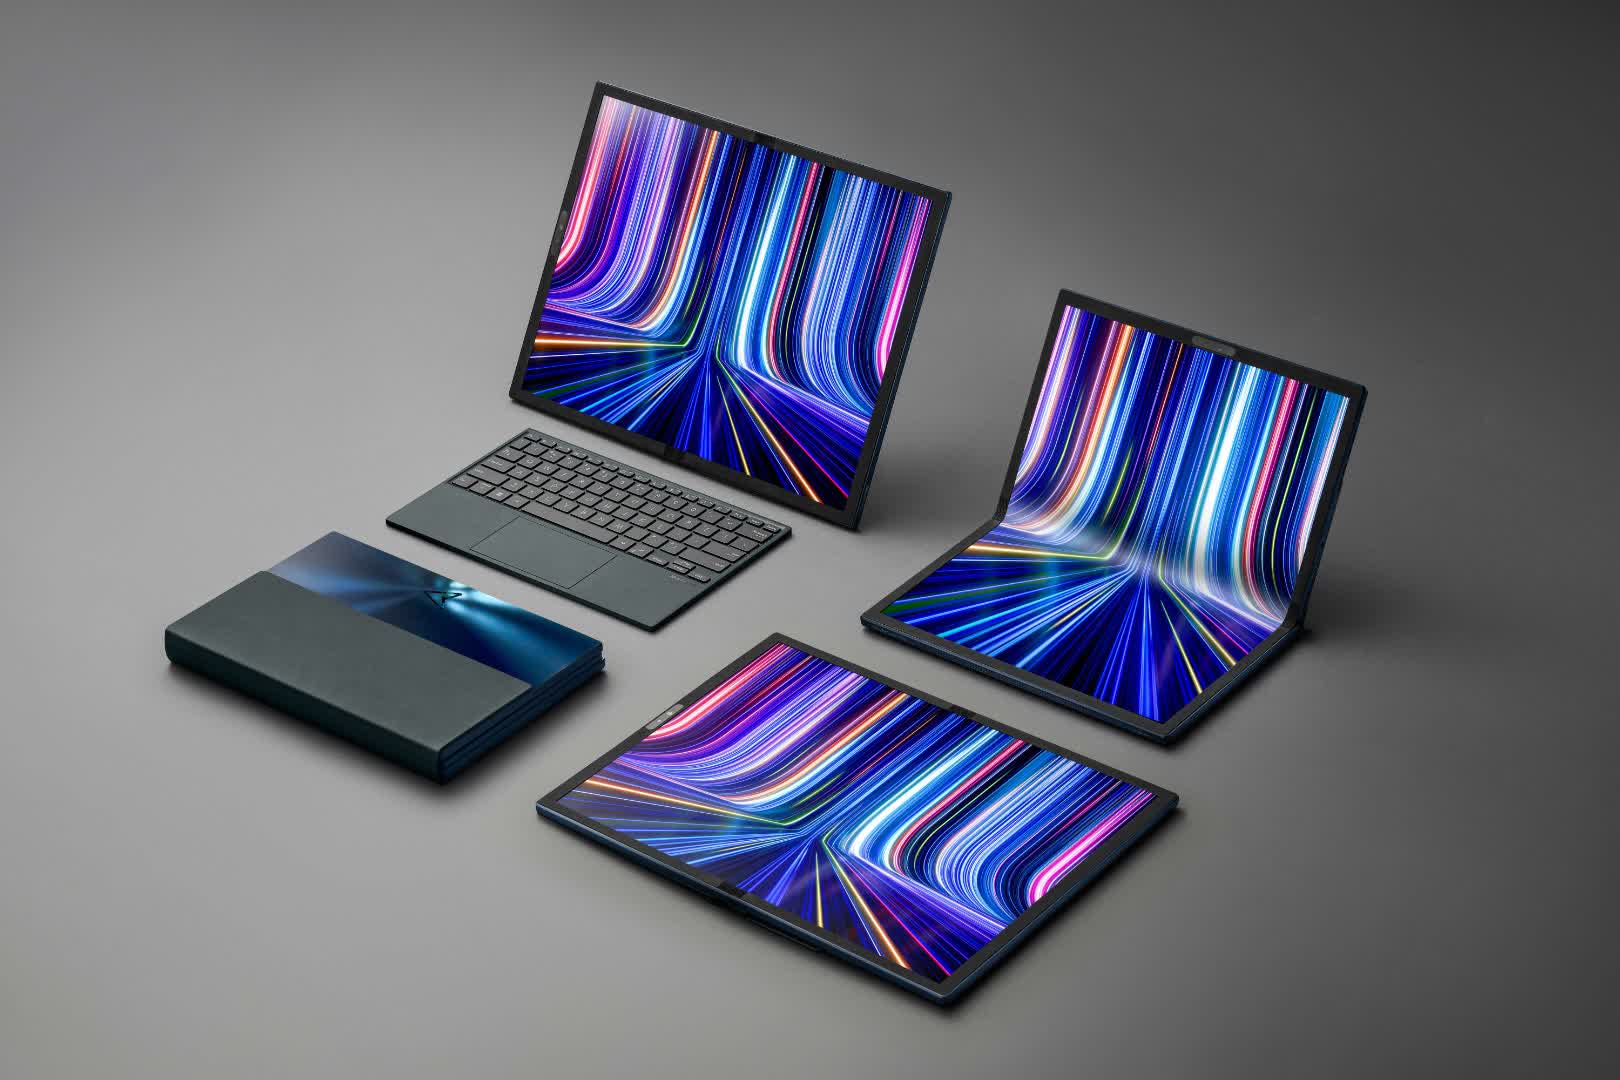 Asus readying 17-inch foldable OLED laptop with 12th-gen Intel CPUs and Thunderbolt 4